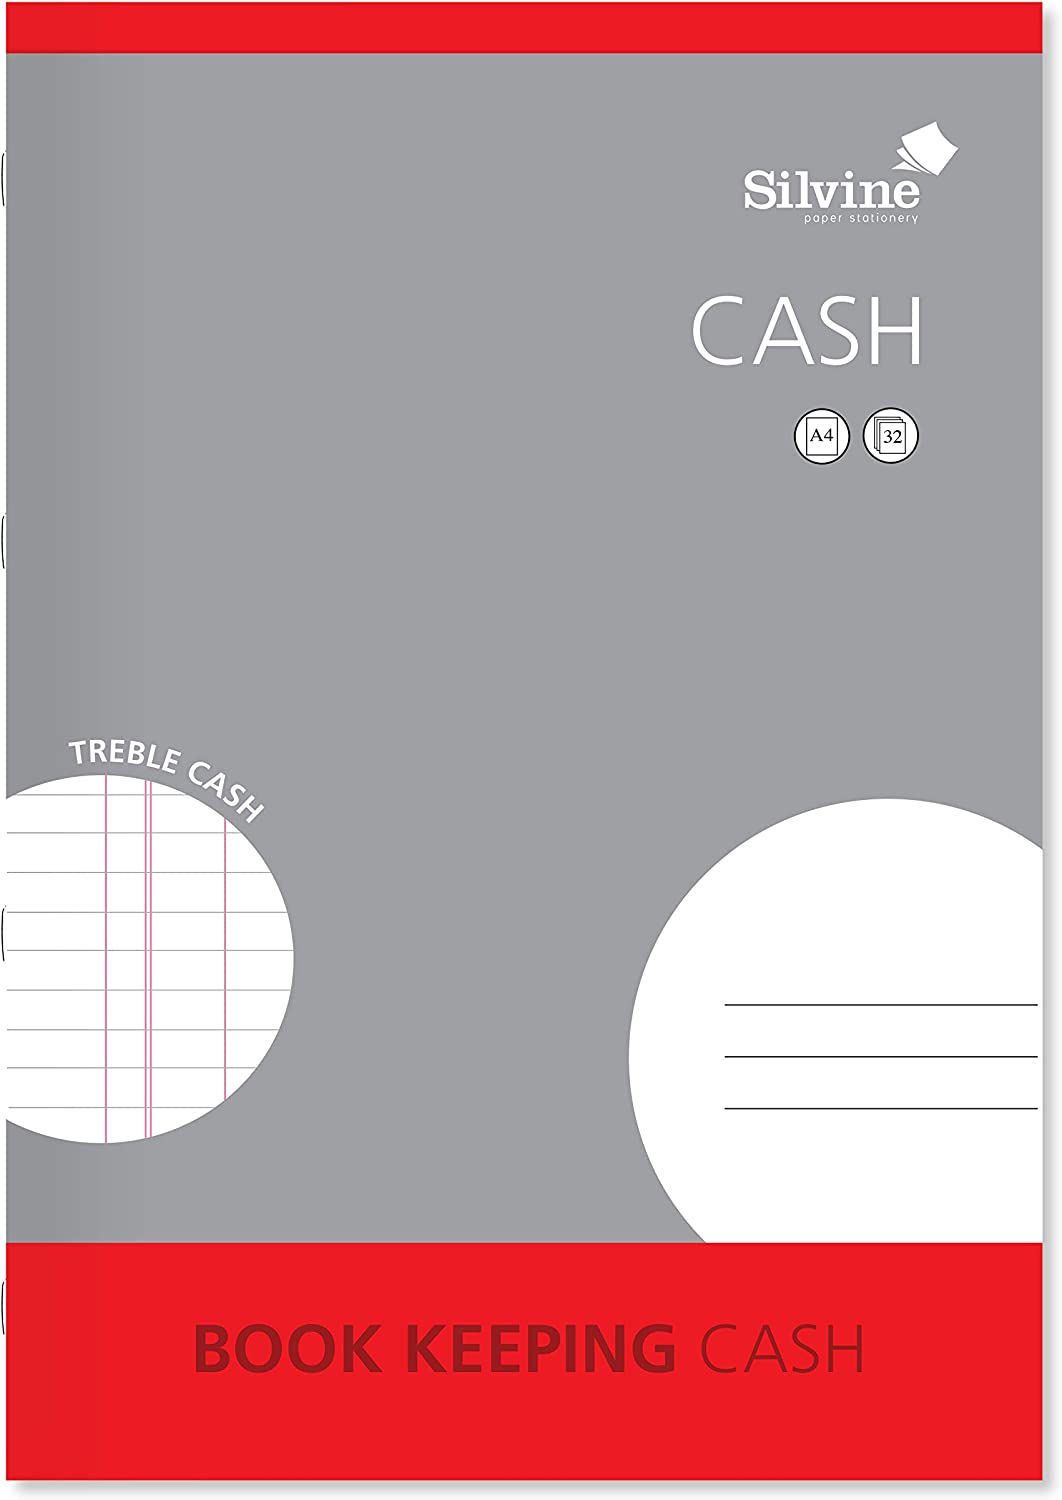 32 Pages A4 Book Keeping Printed Treble Cash